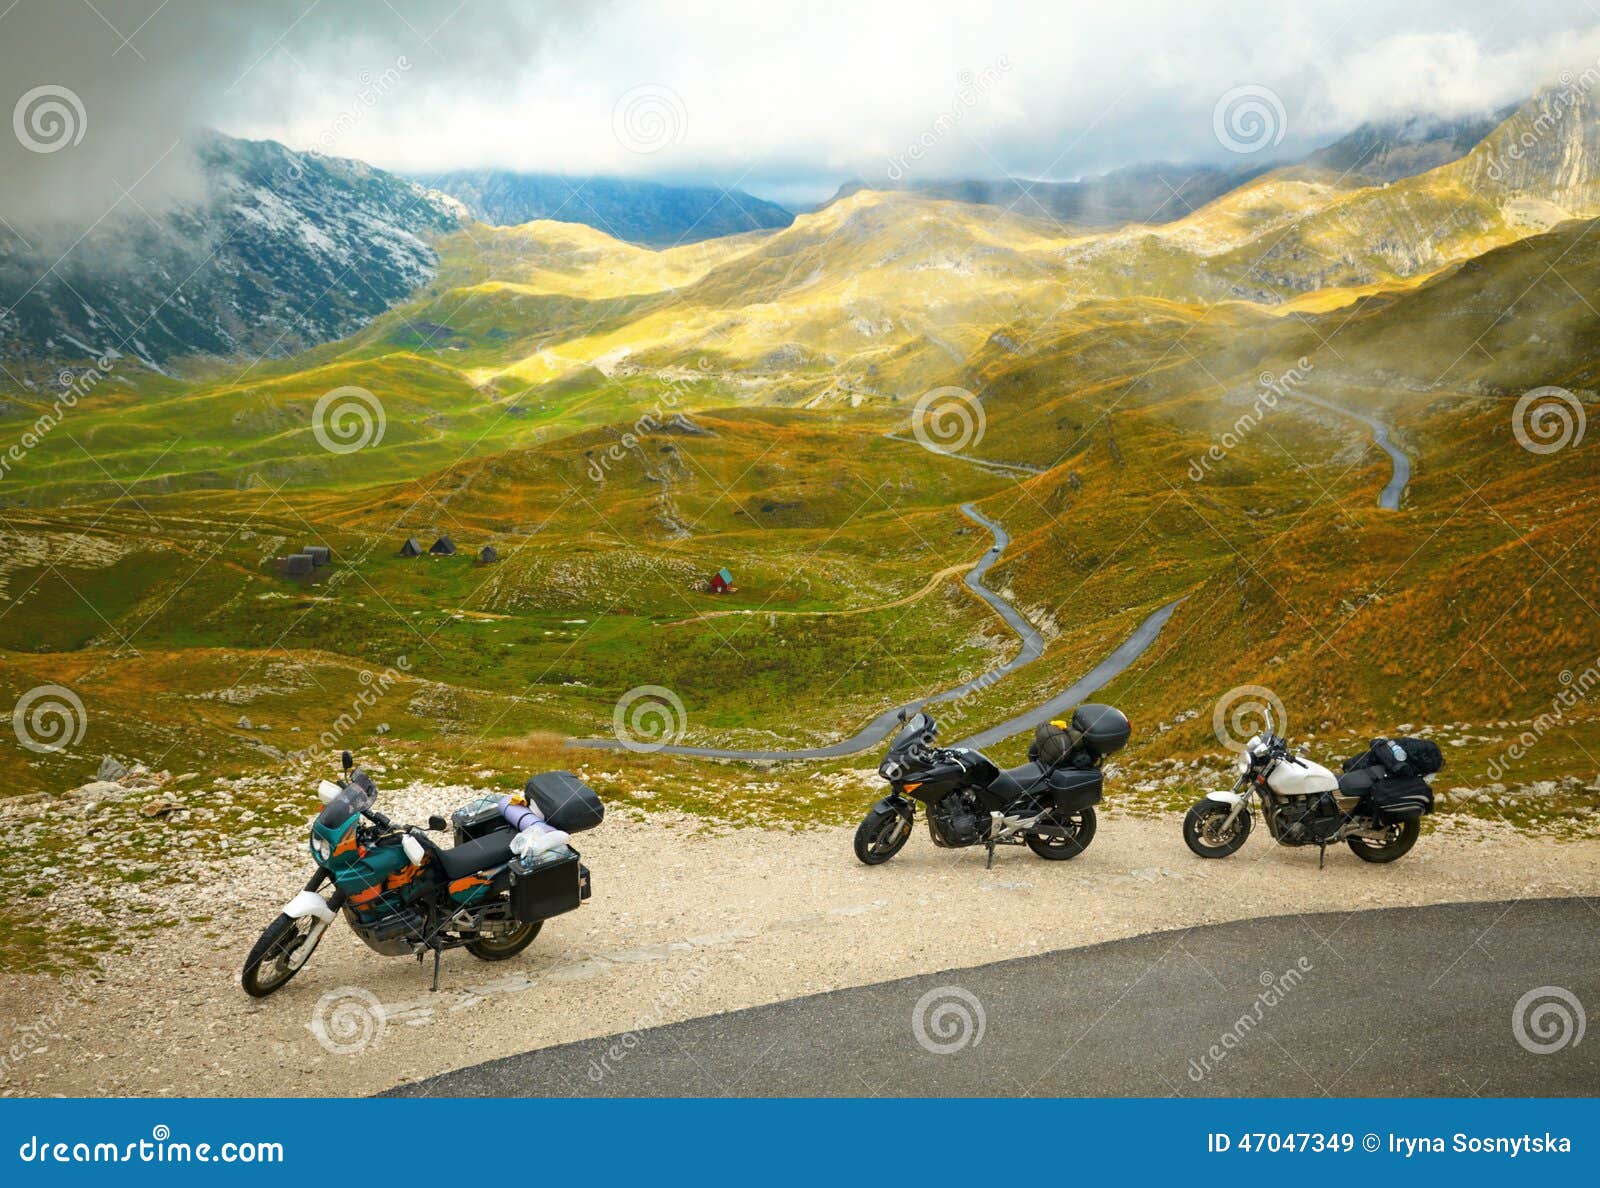 landscape with mountain road and three motorbikes